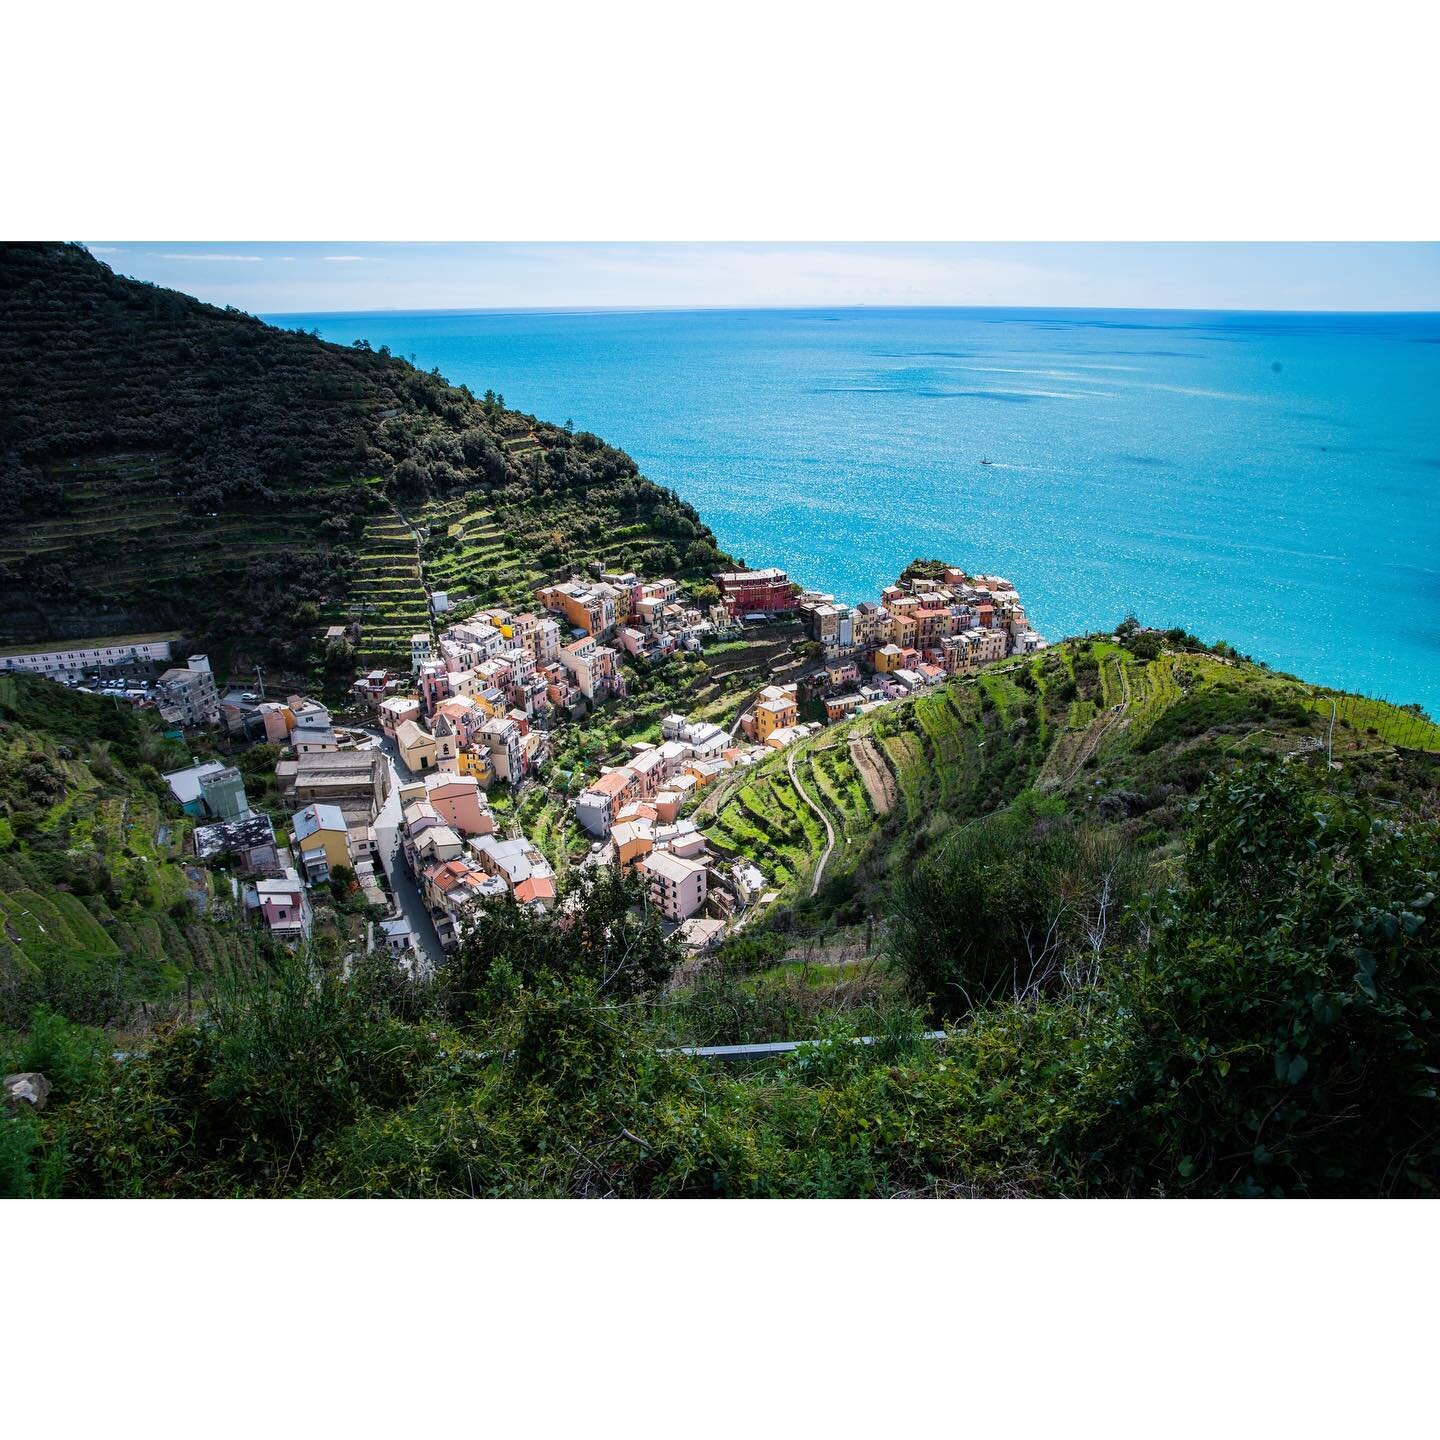 Finally got around to editing photos from Cinque Terre this April. 1/2.